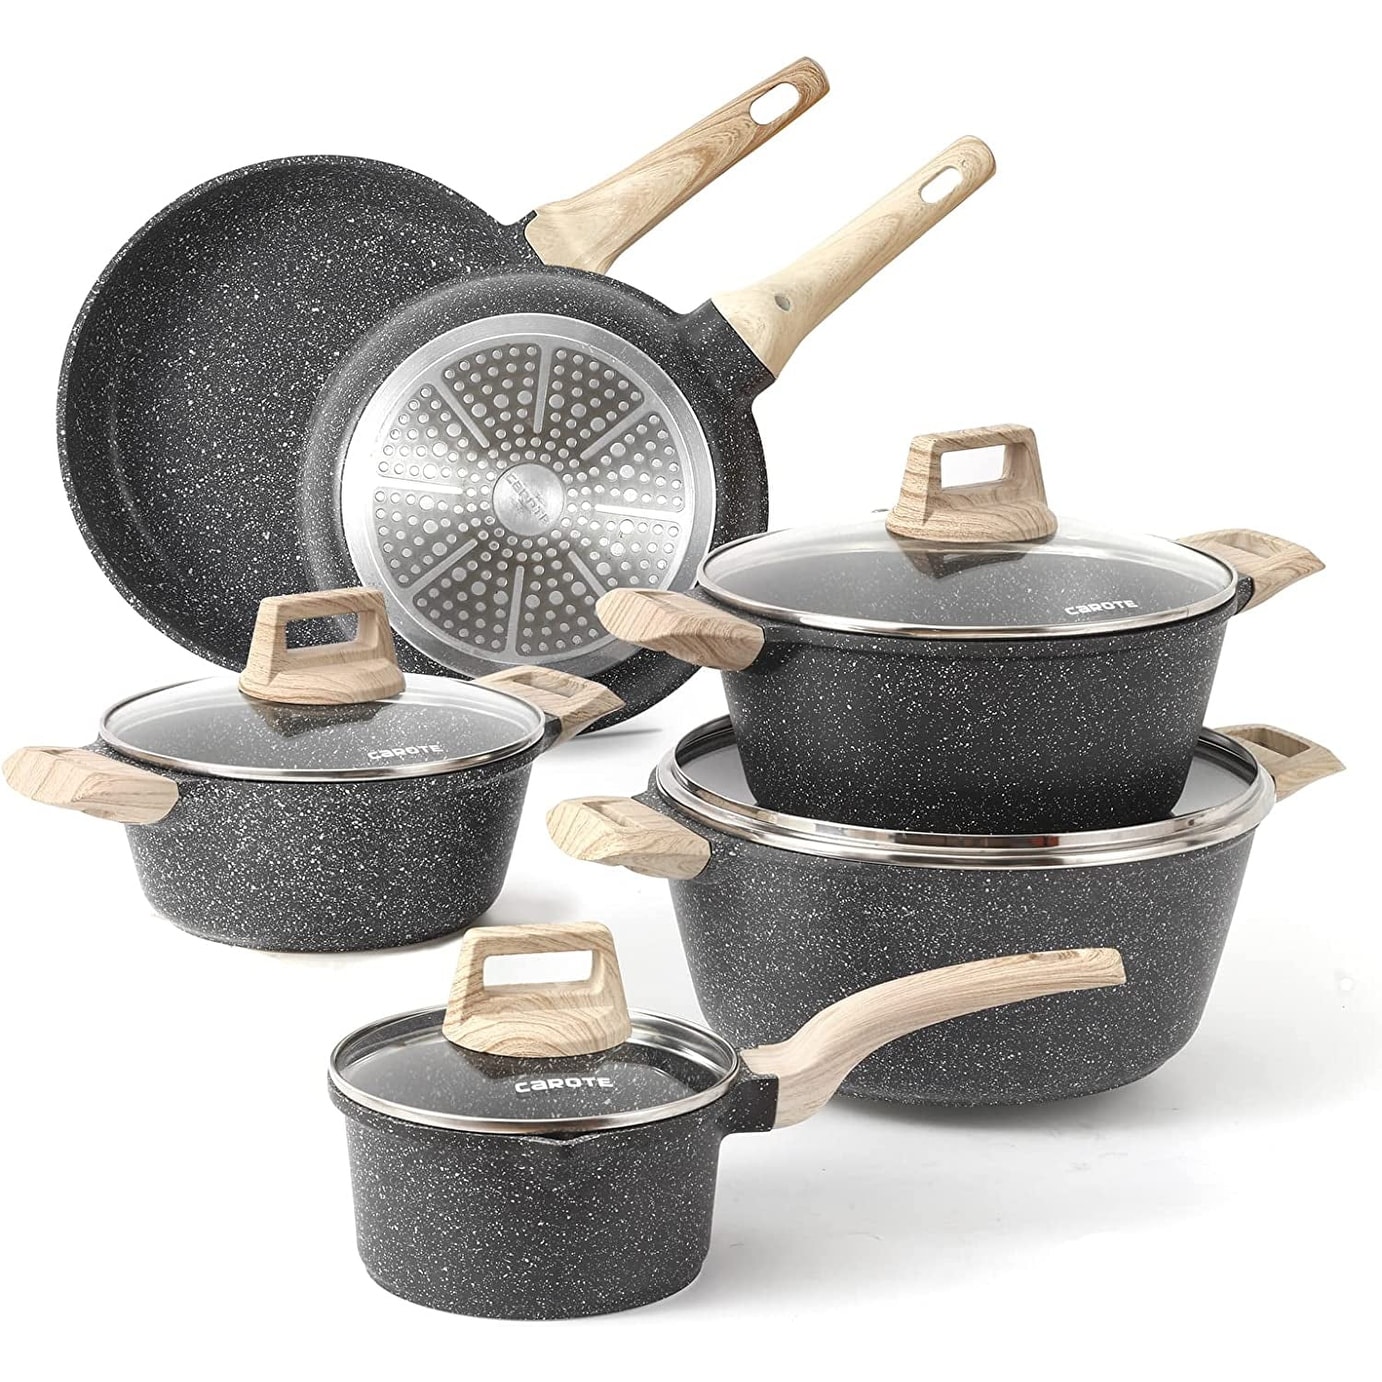 Easy Storage 6PCS Granite Nonstick Cookware Sets with Detachable